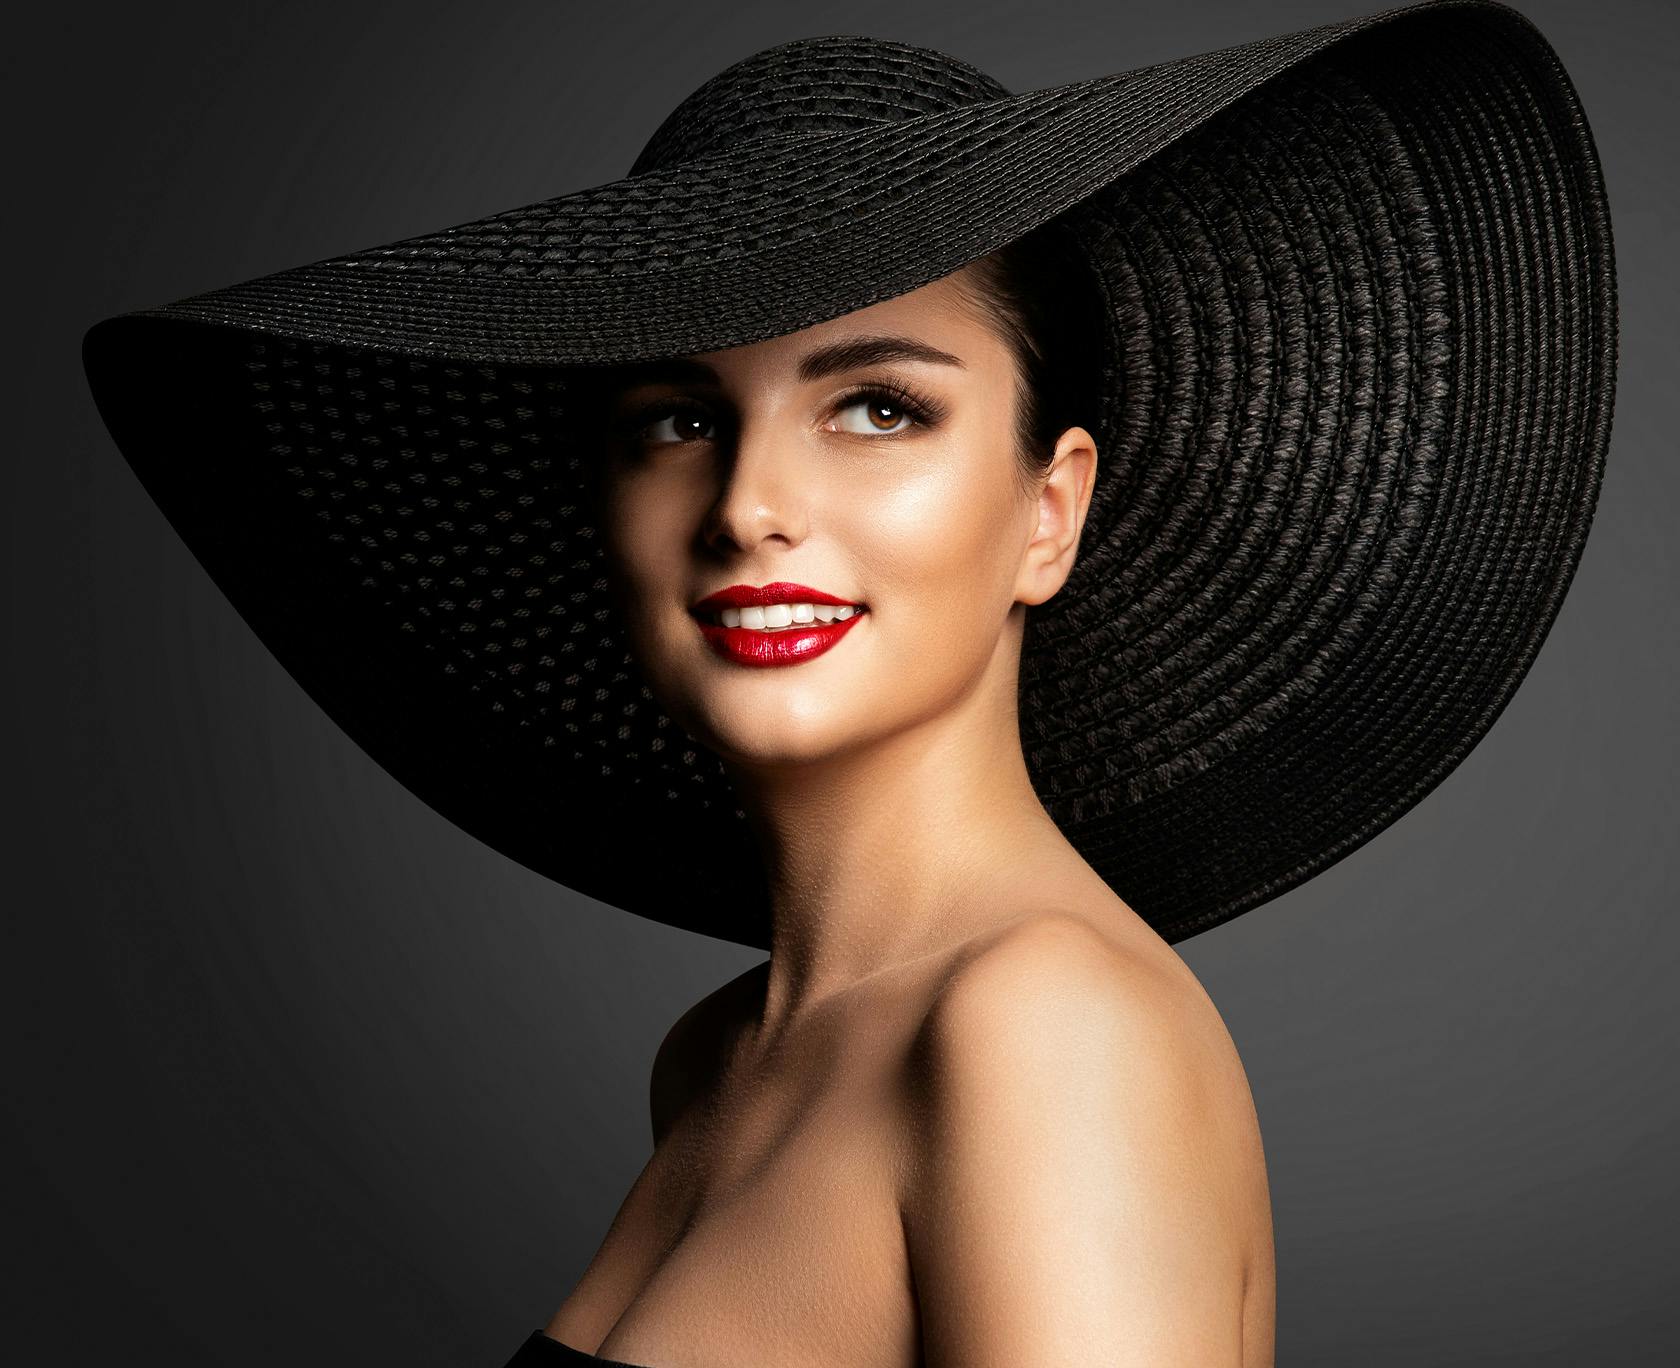 Woman in a black sun hat smiling